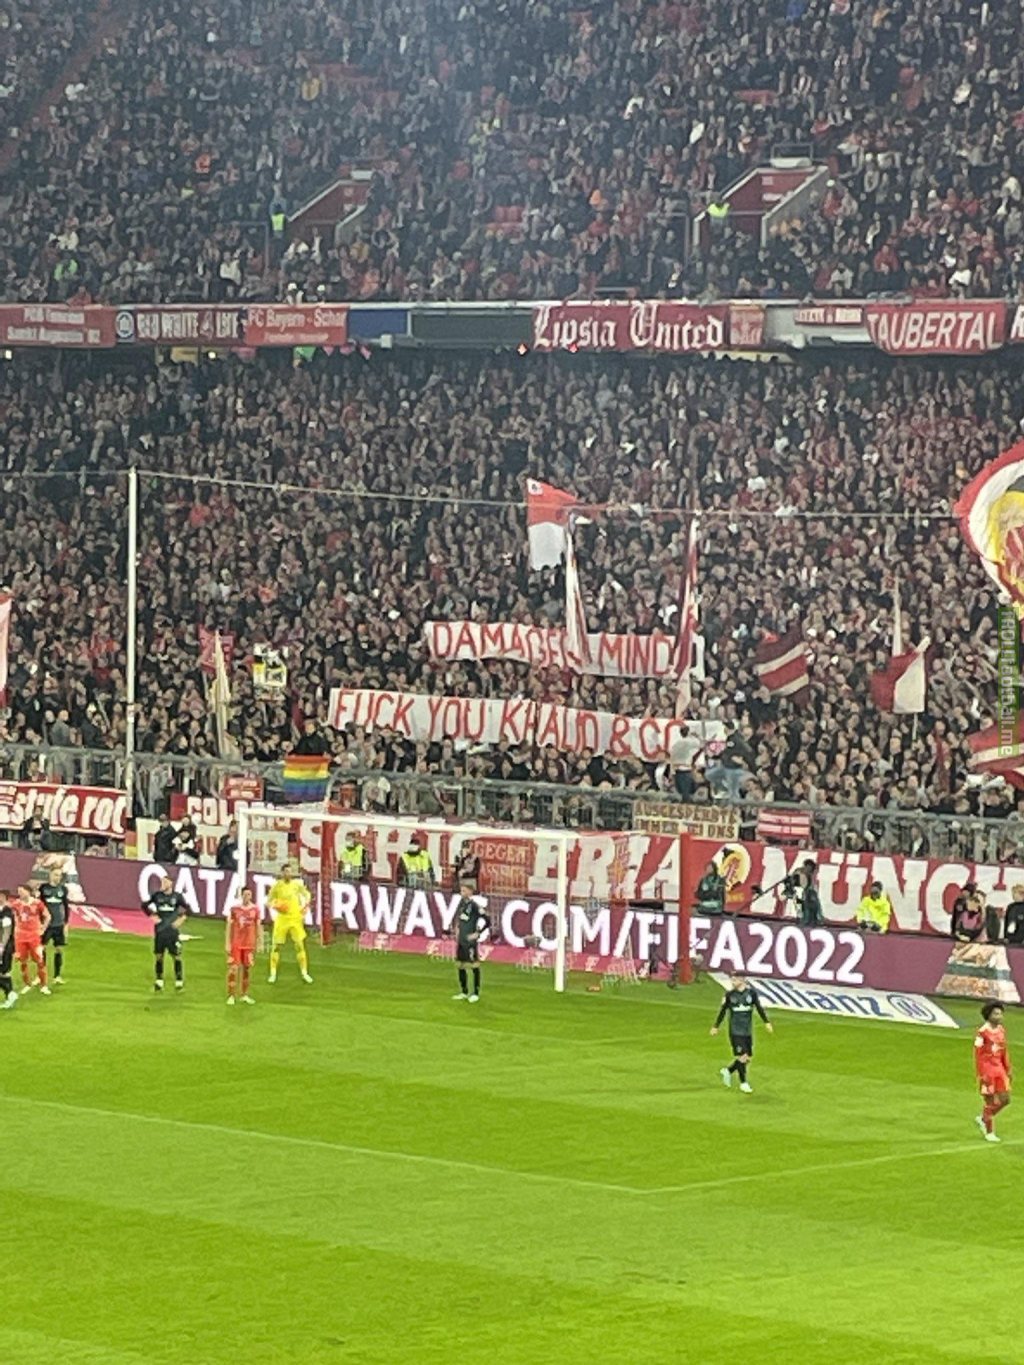 Bayern fans respond to Qatar World Cup ambassador Khalid Salman who described homosexuality as “damage in the mind” - 'Damaged minds! F*** you Khalid & co' [ photo by Niedderer @itstheicebird]